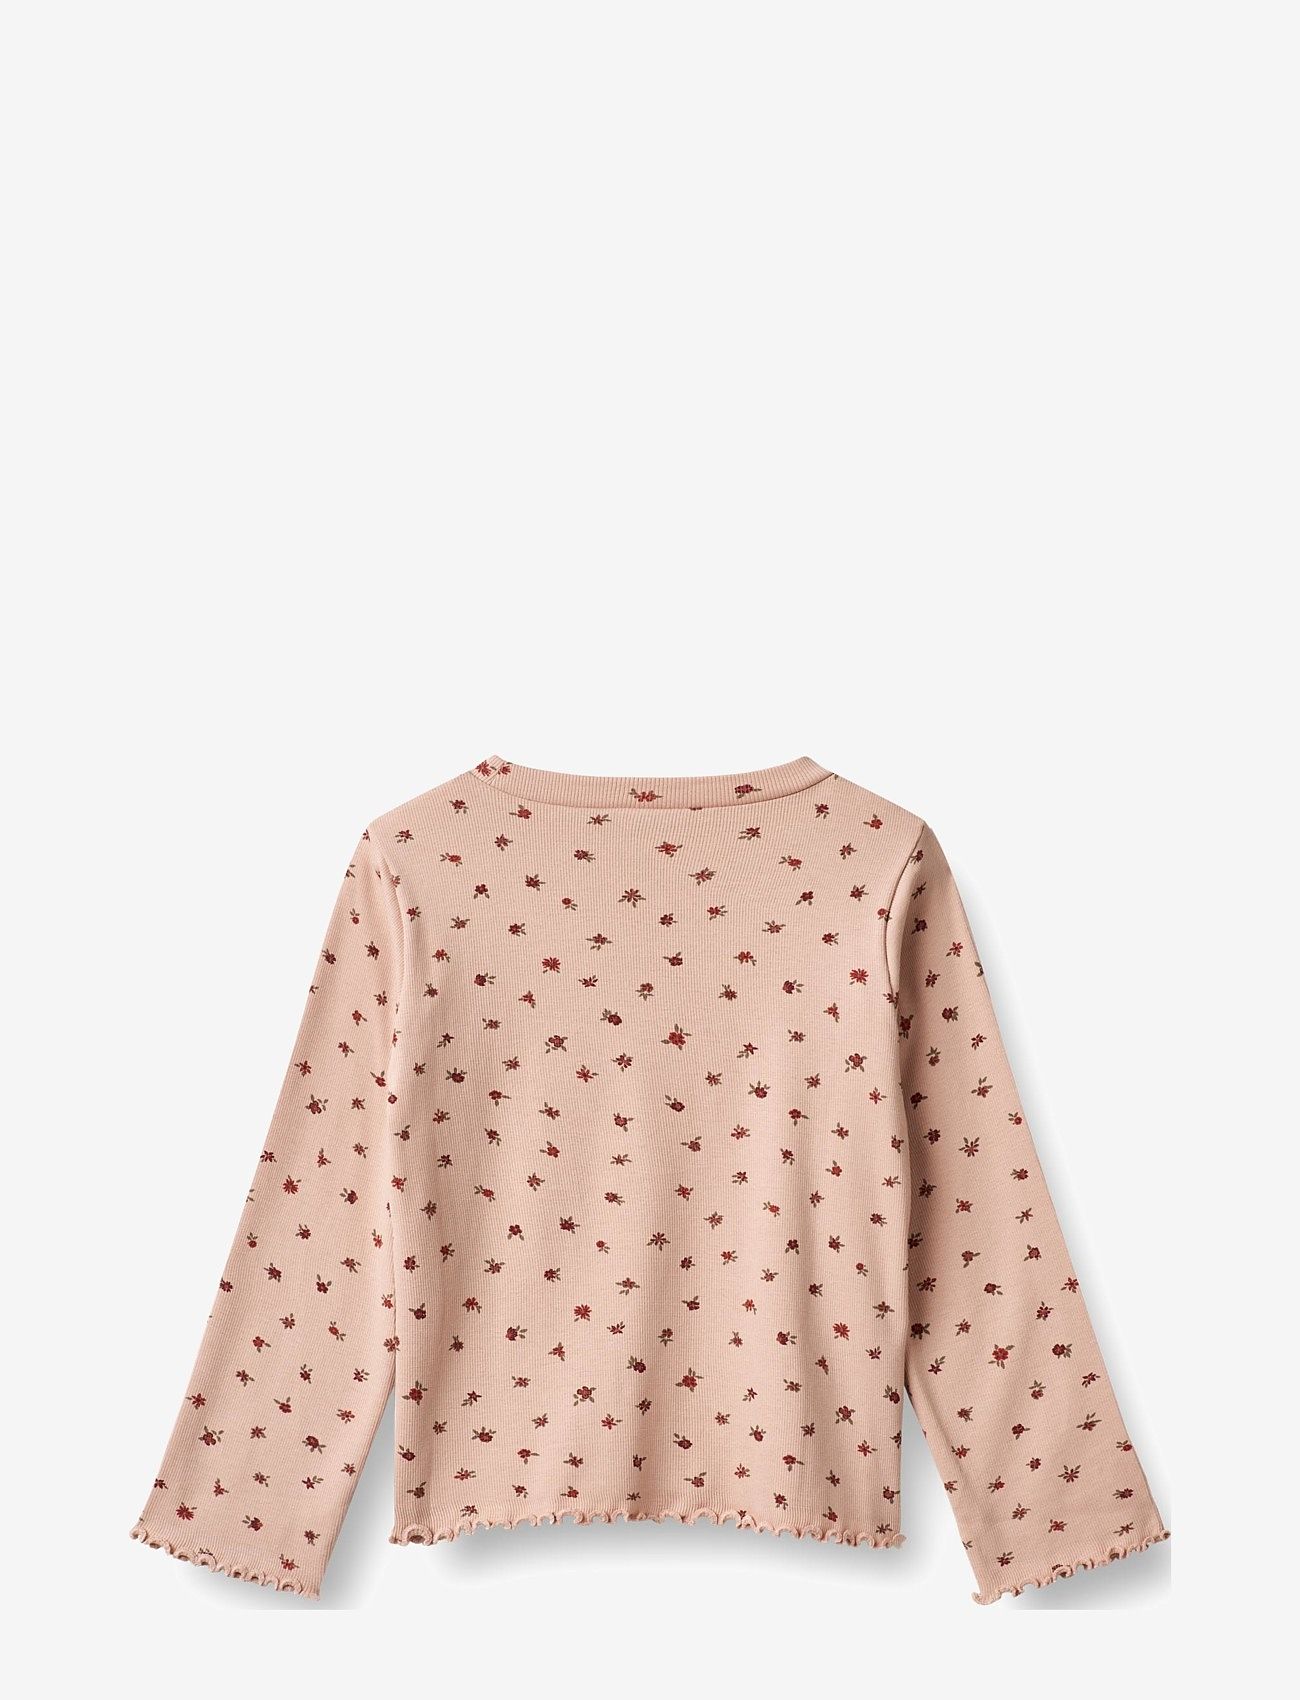 Wheat - T-Shirt Else - long-sleeved t-shirts - pink sand flowers - 1